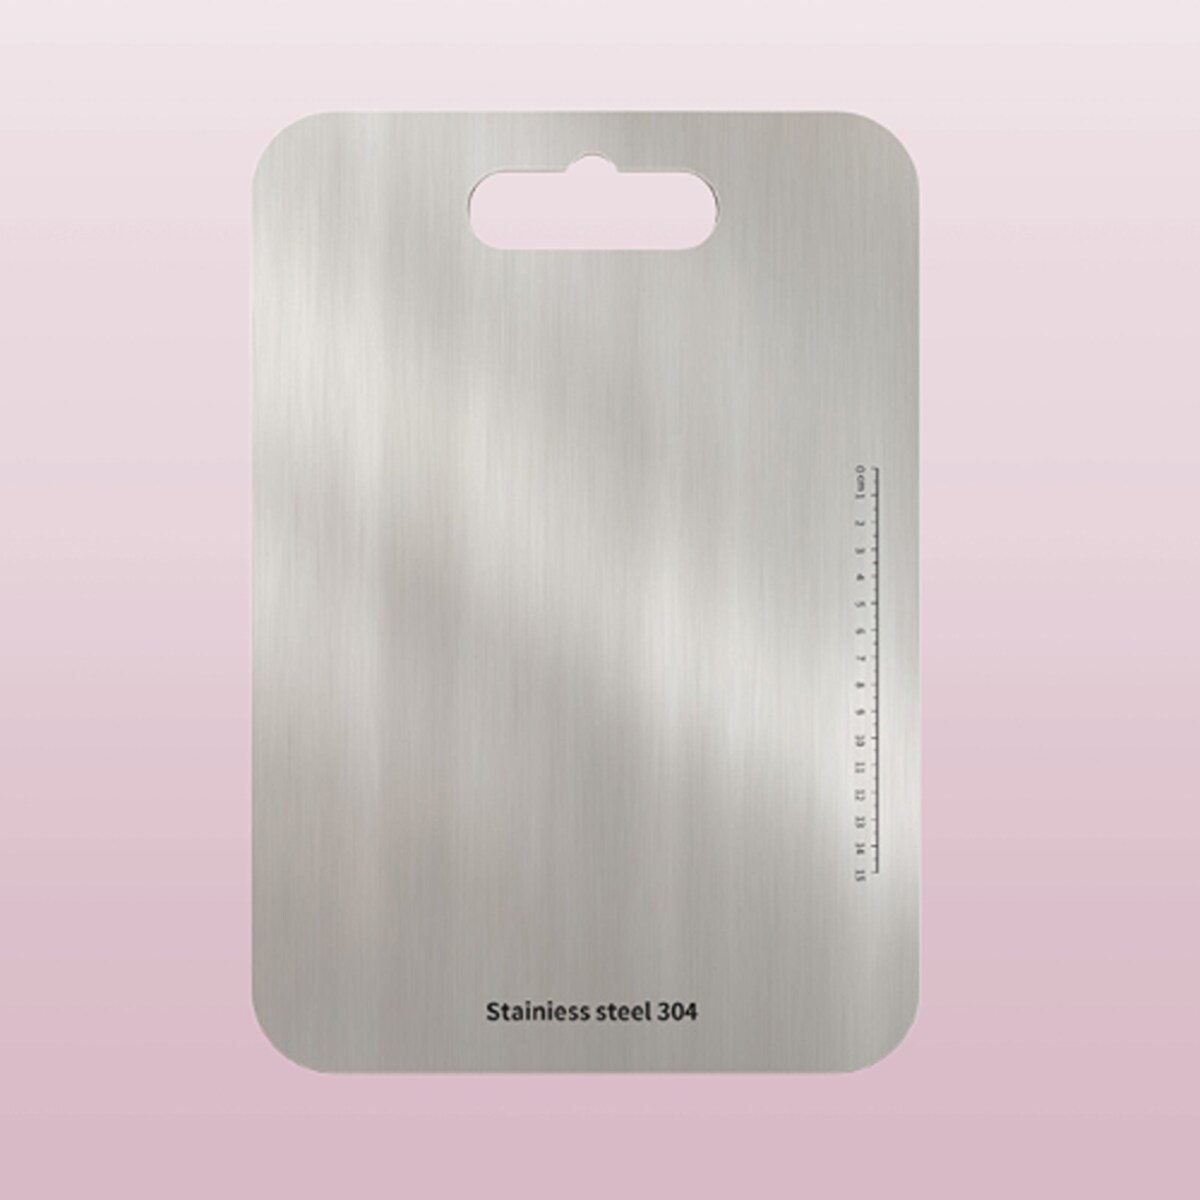 18x12 Inches Stainless Steel Cutting Board for Kitchen